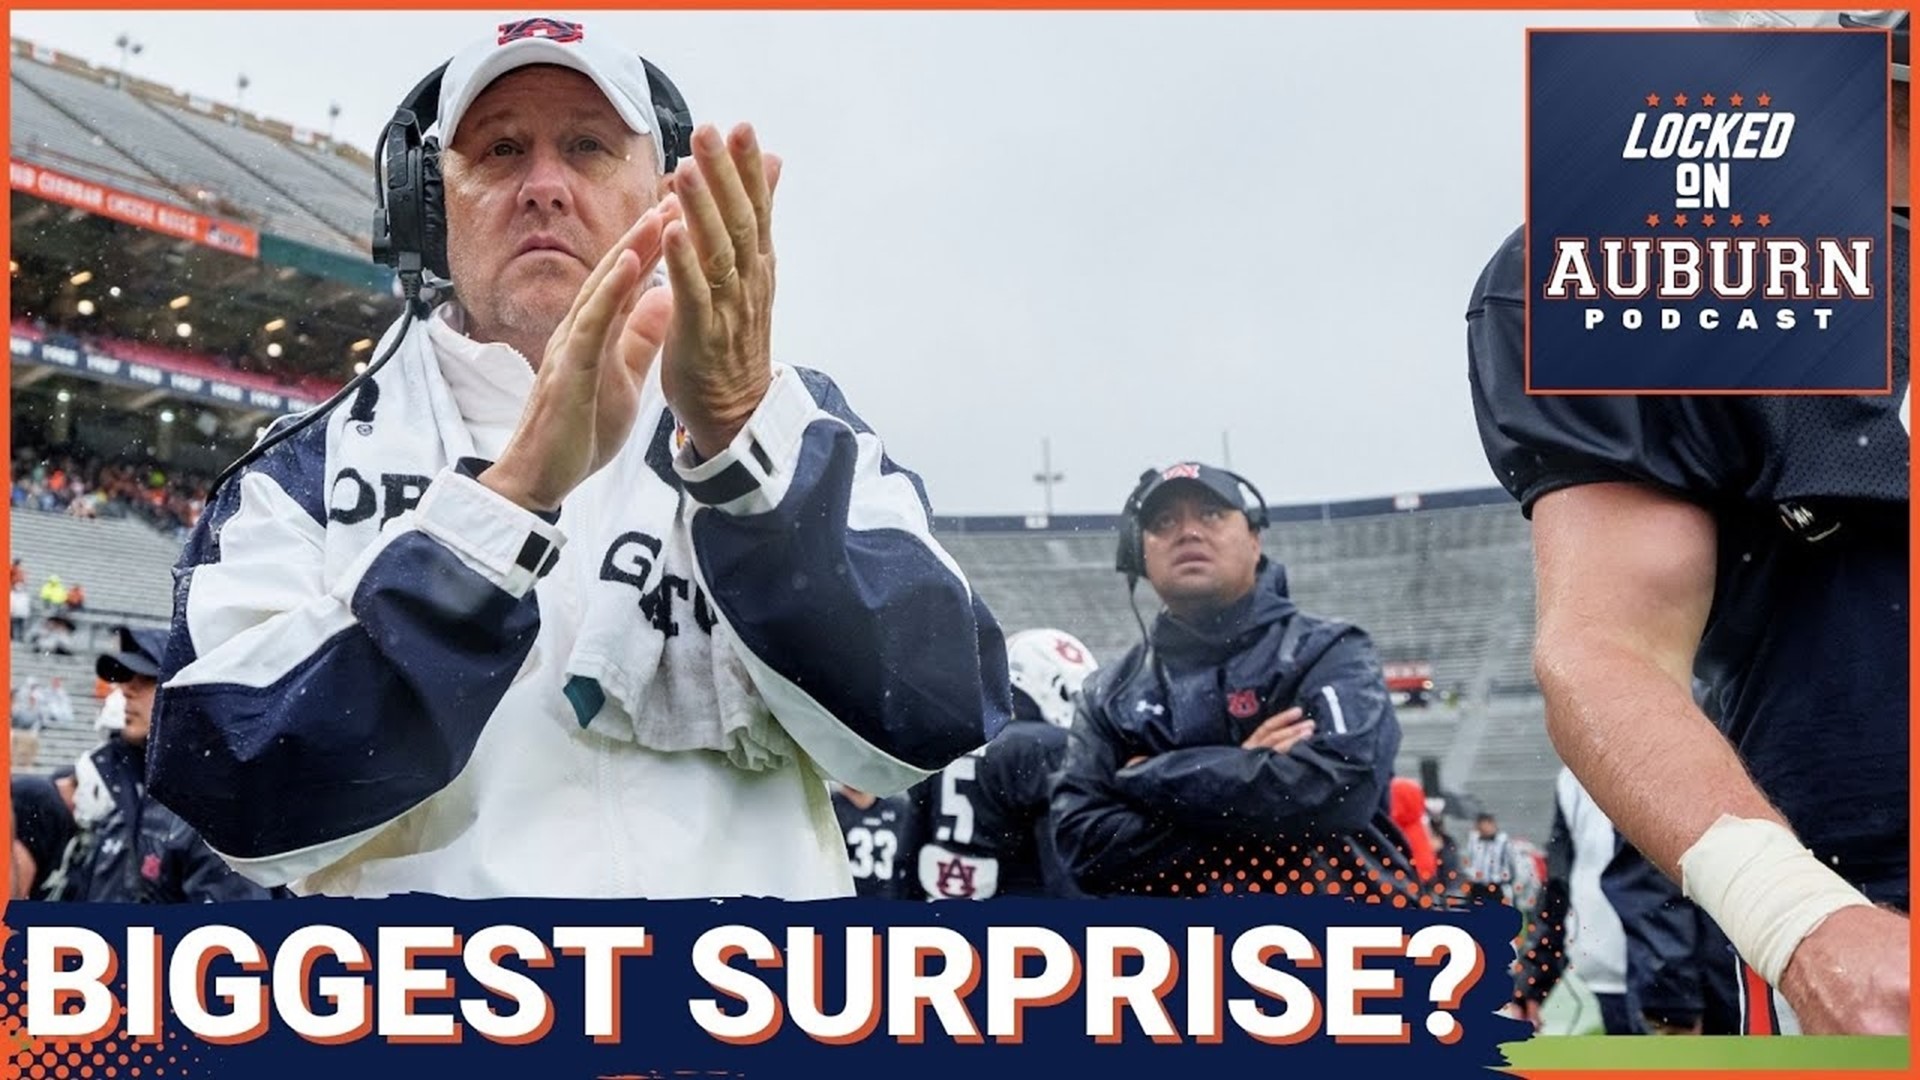 Join your host Zac Blackerby as he sits down with Montgomery radio legend, Darrell Dapprich, to discuss the biggest surprises from Auburn football this season.